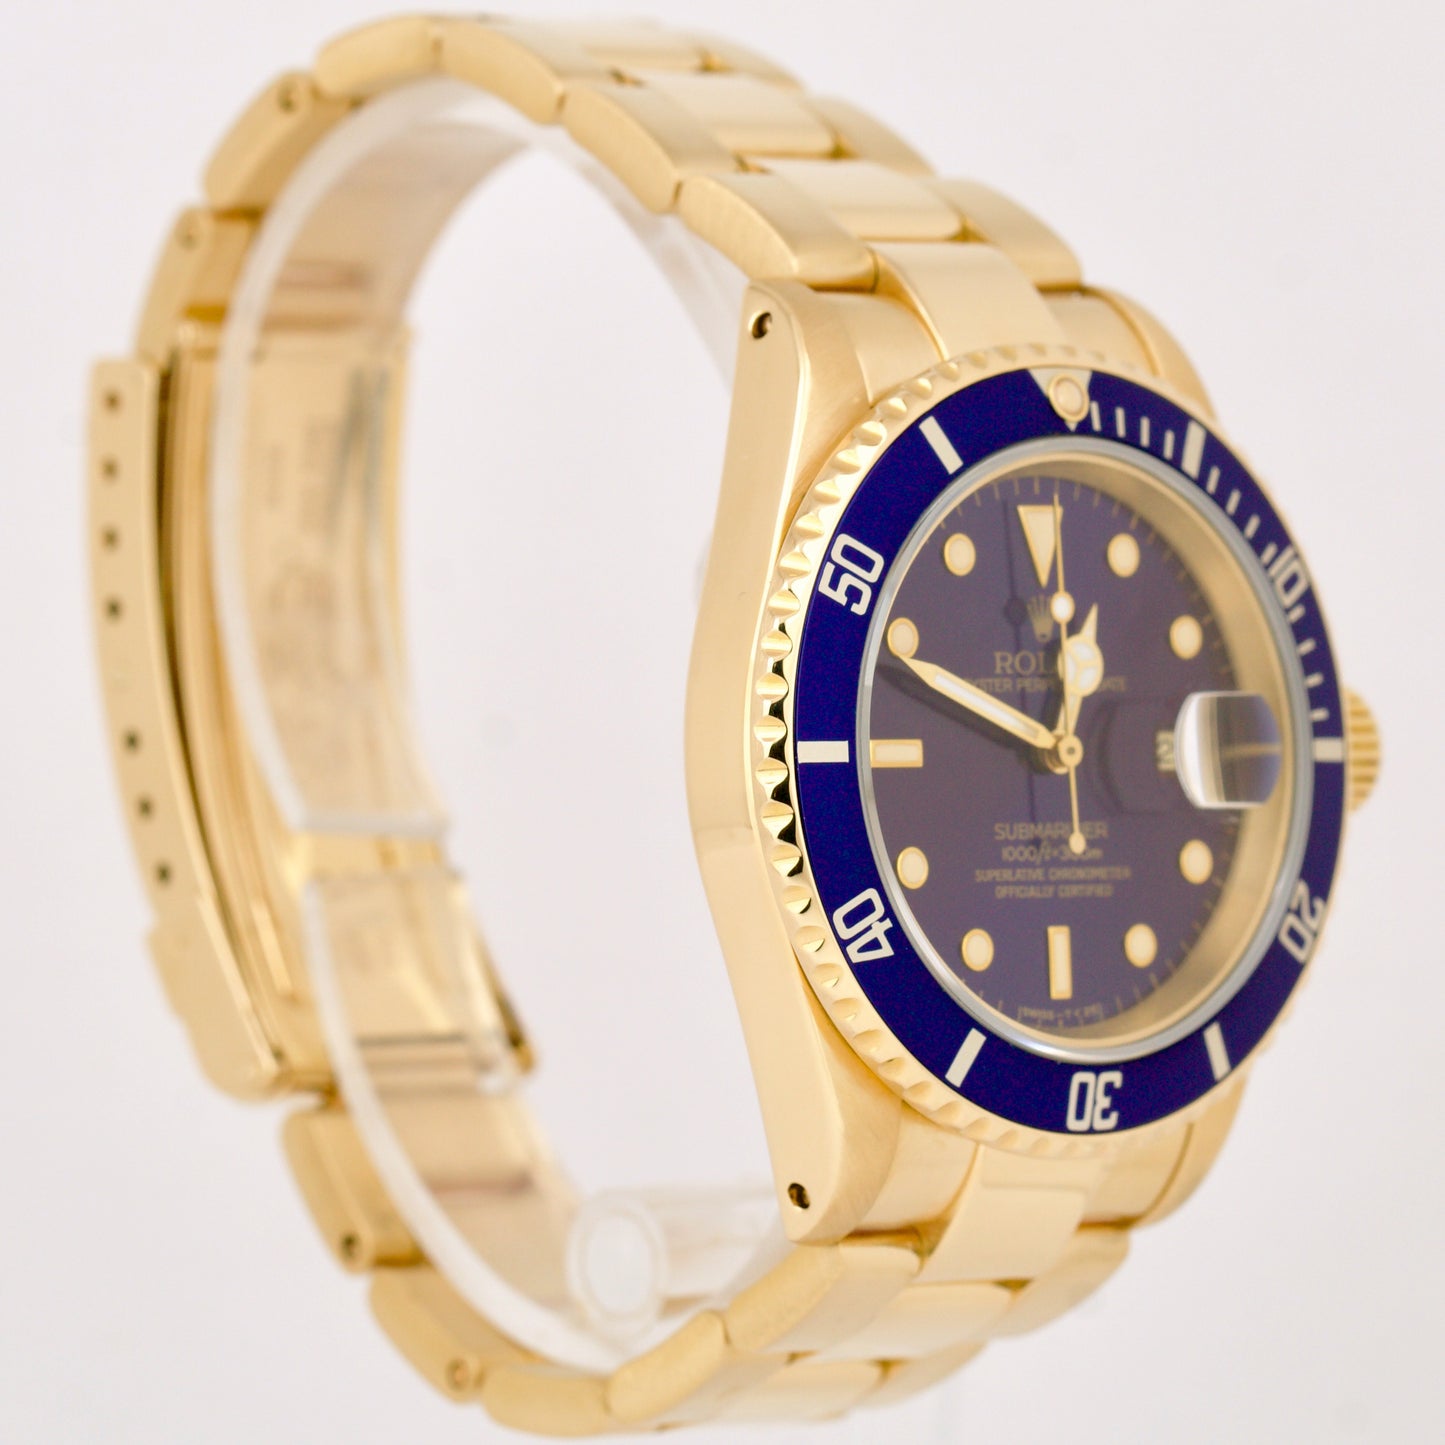 Rolex Submariner Date BLUE 18K Yellow Gold 40mm Oyster Automatic Watch 16618 LB